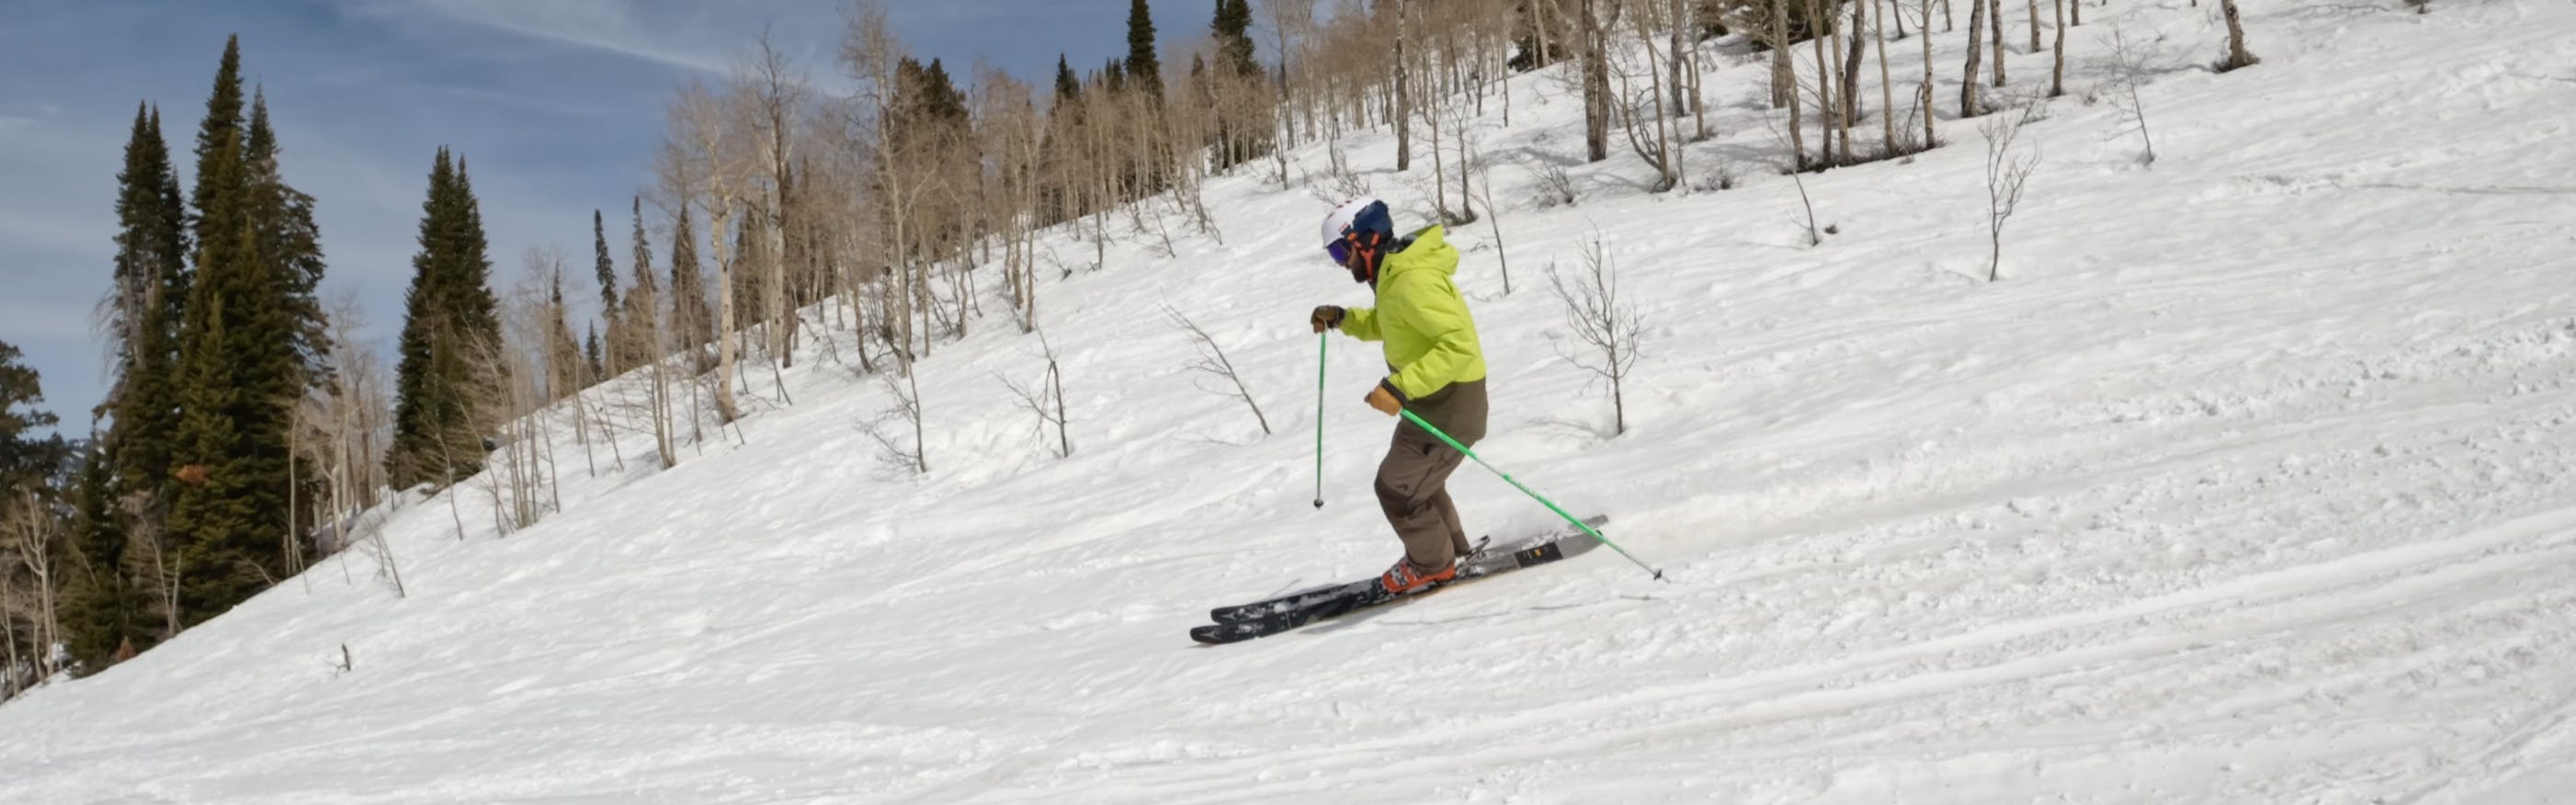 A skier on the 2023 Atomic Backland 100 Skis.